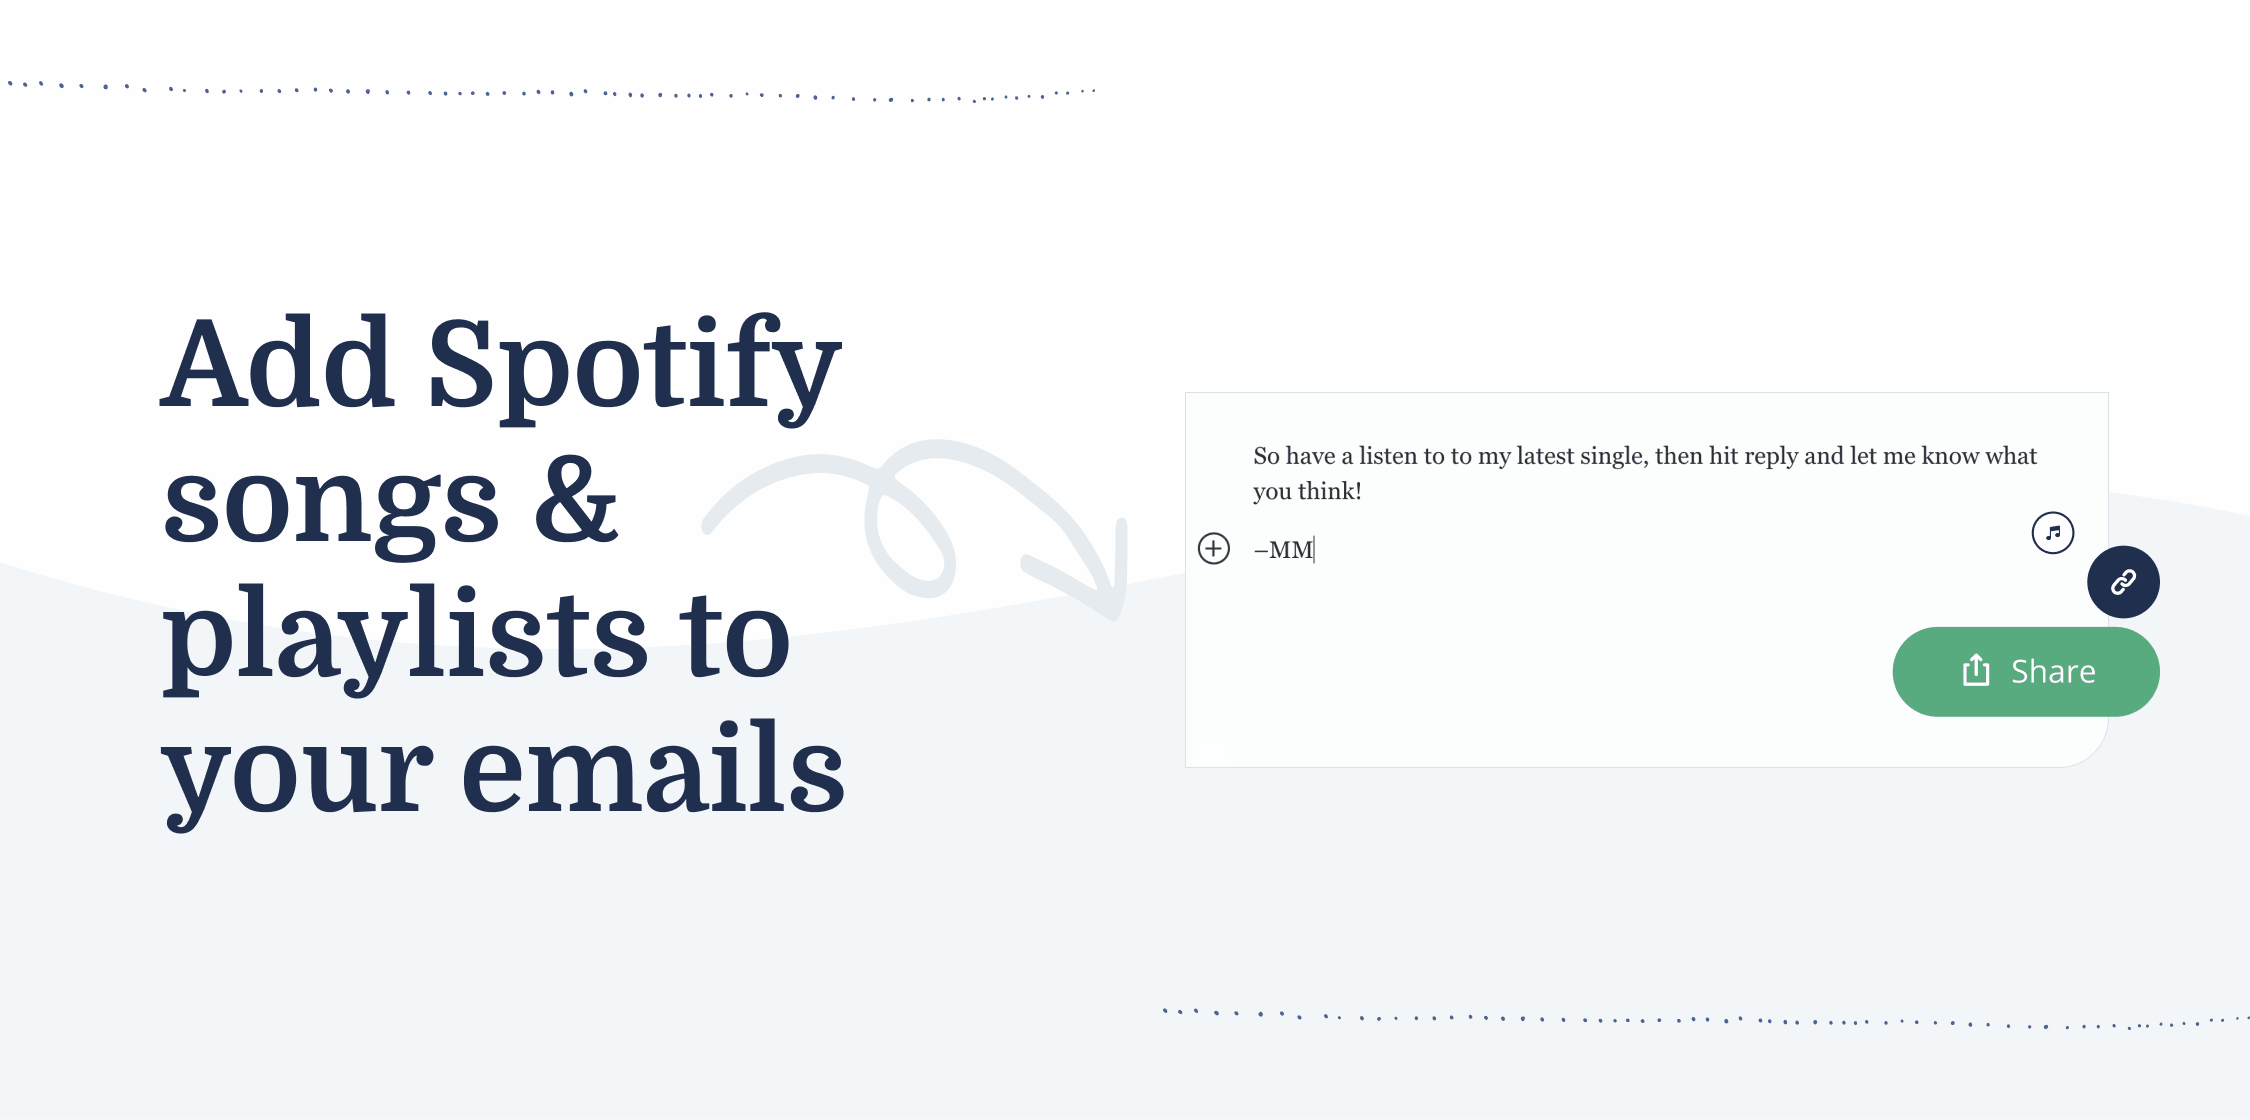 Learn more about embedding Spotify in emails